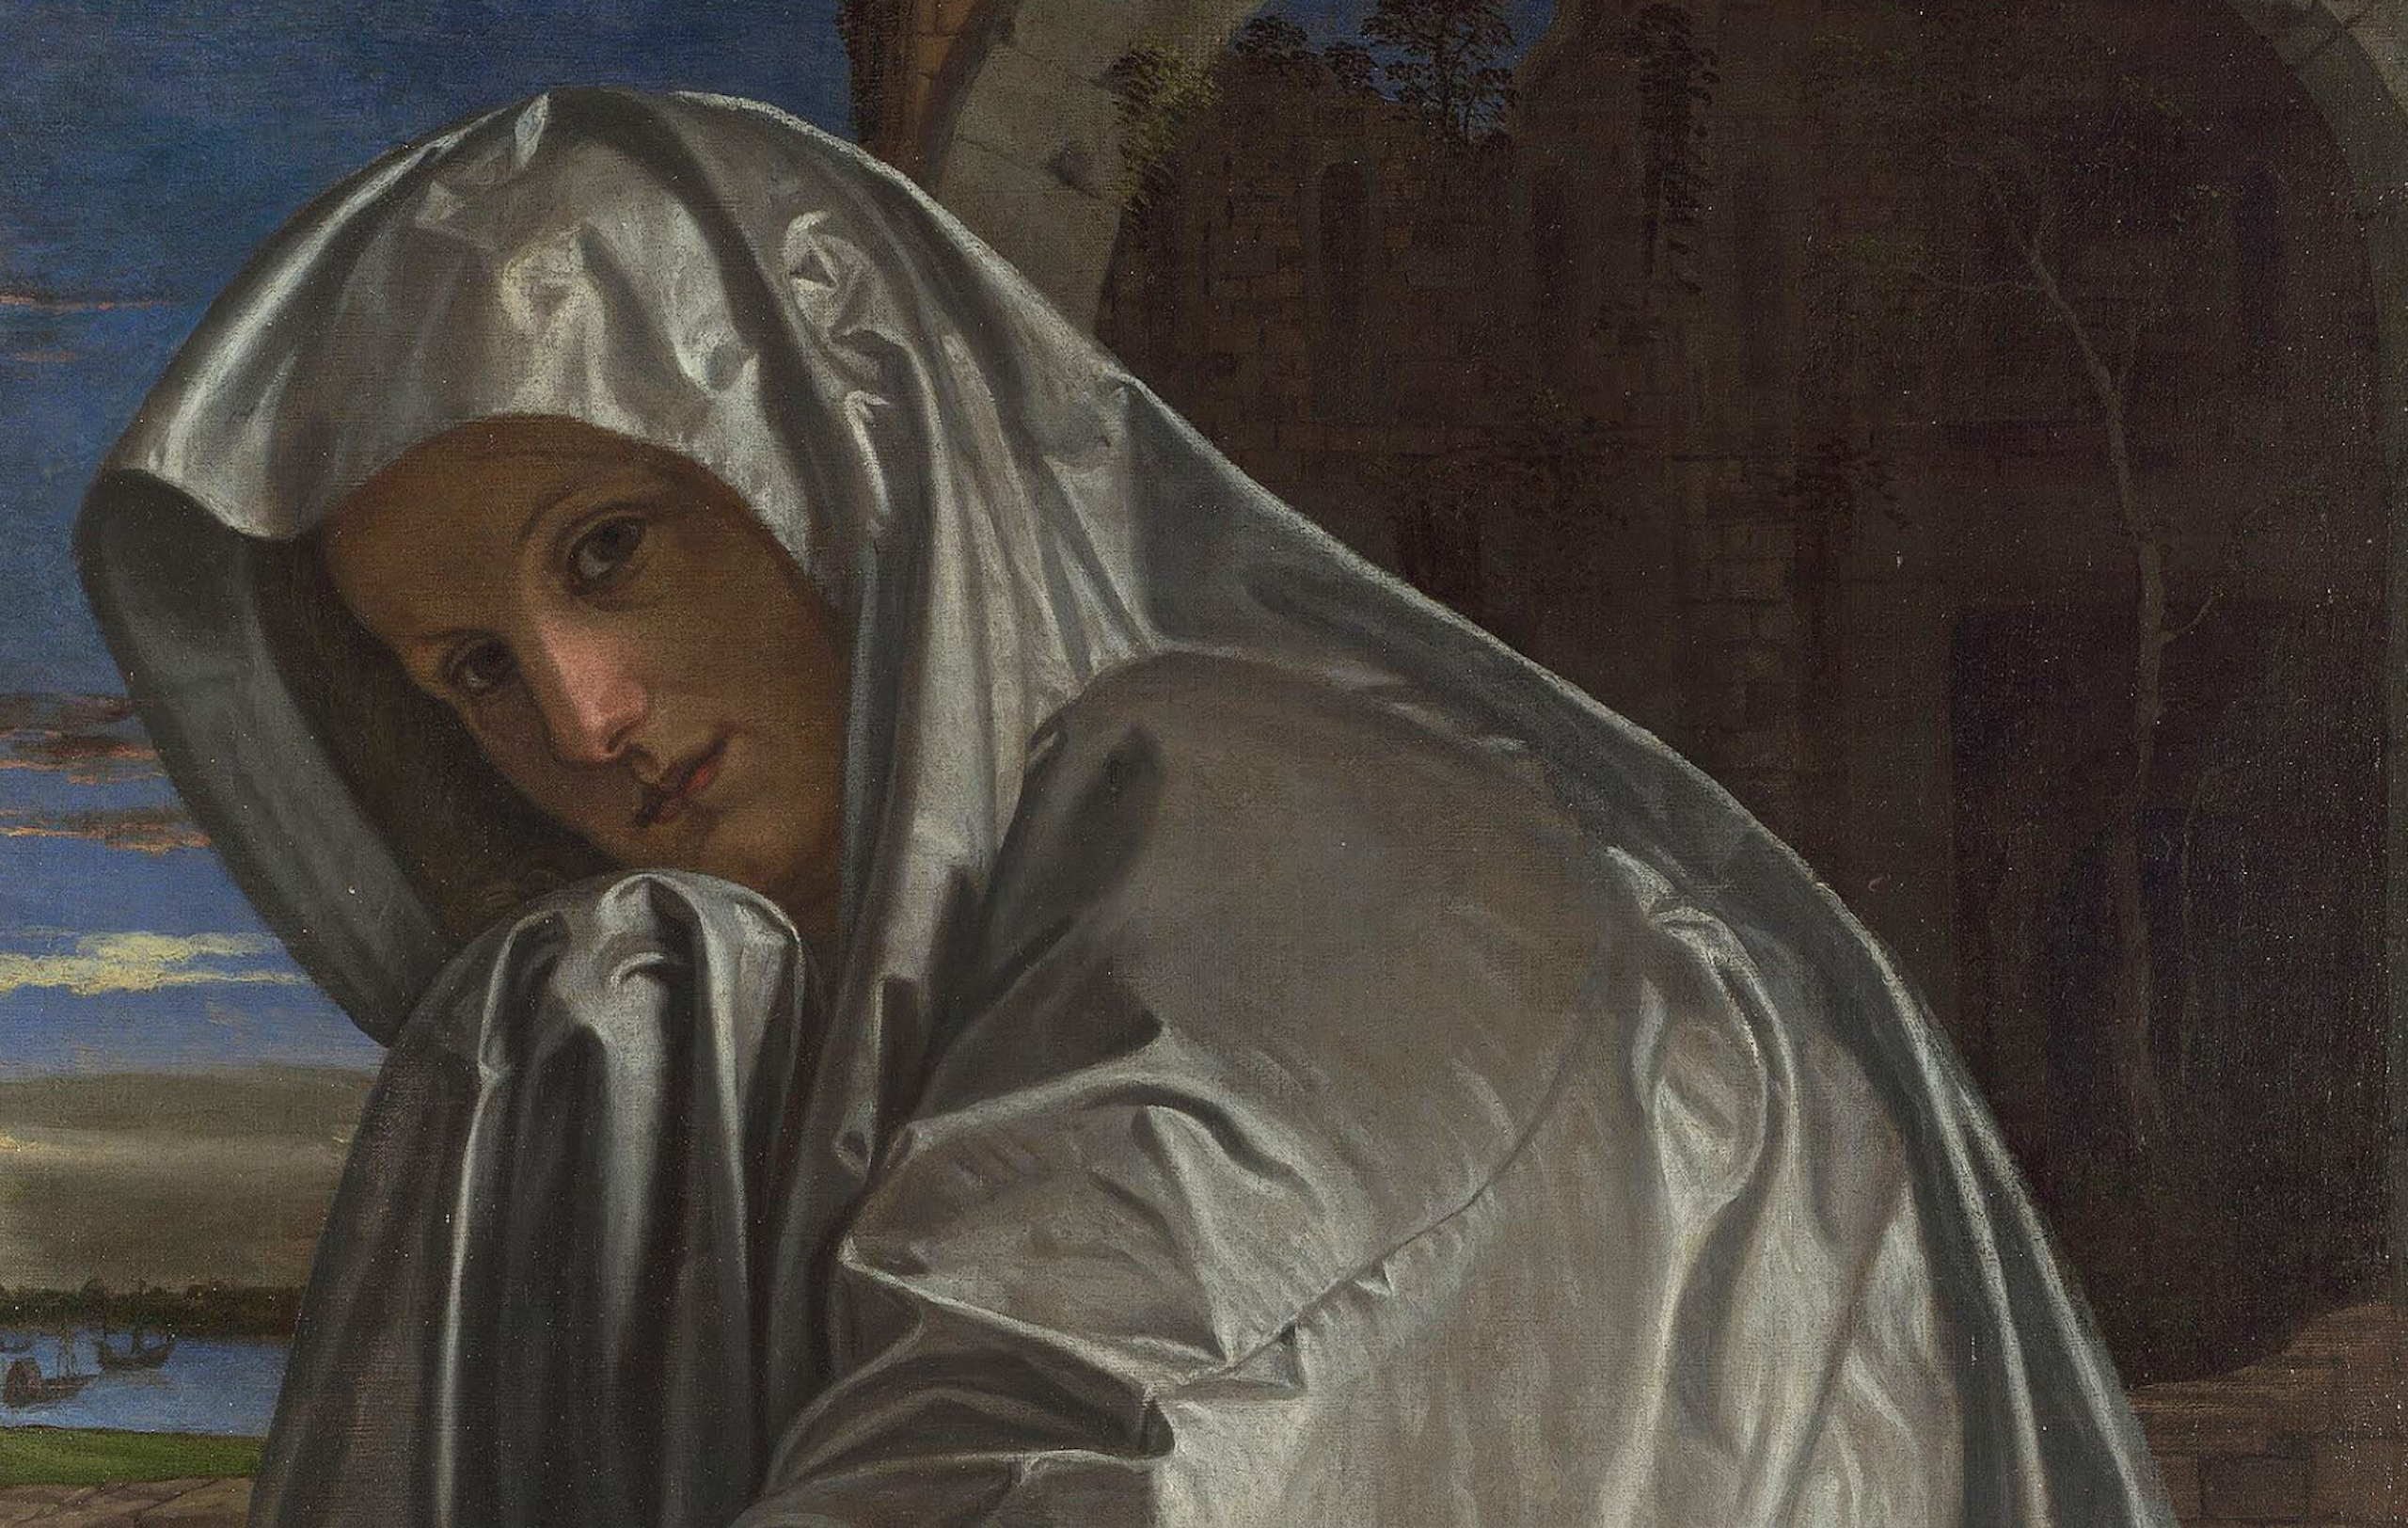 Mary Magdalene in a silver cloak